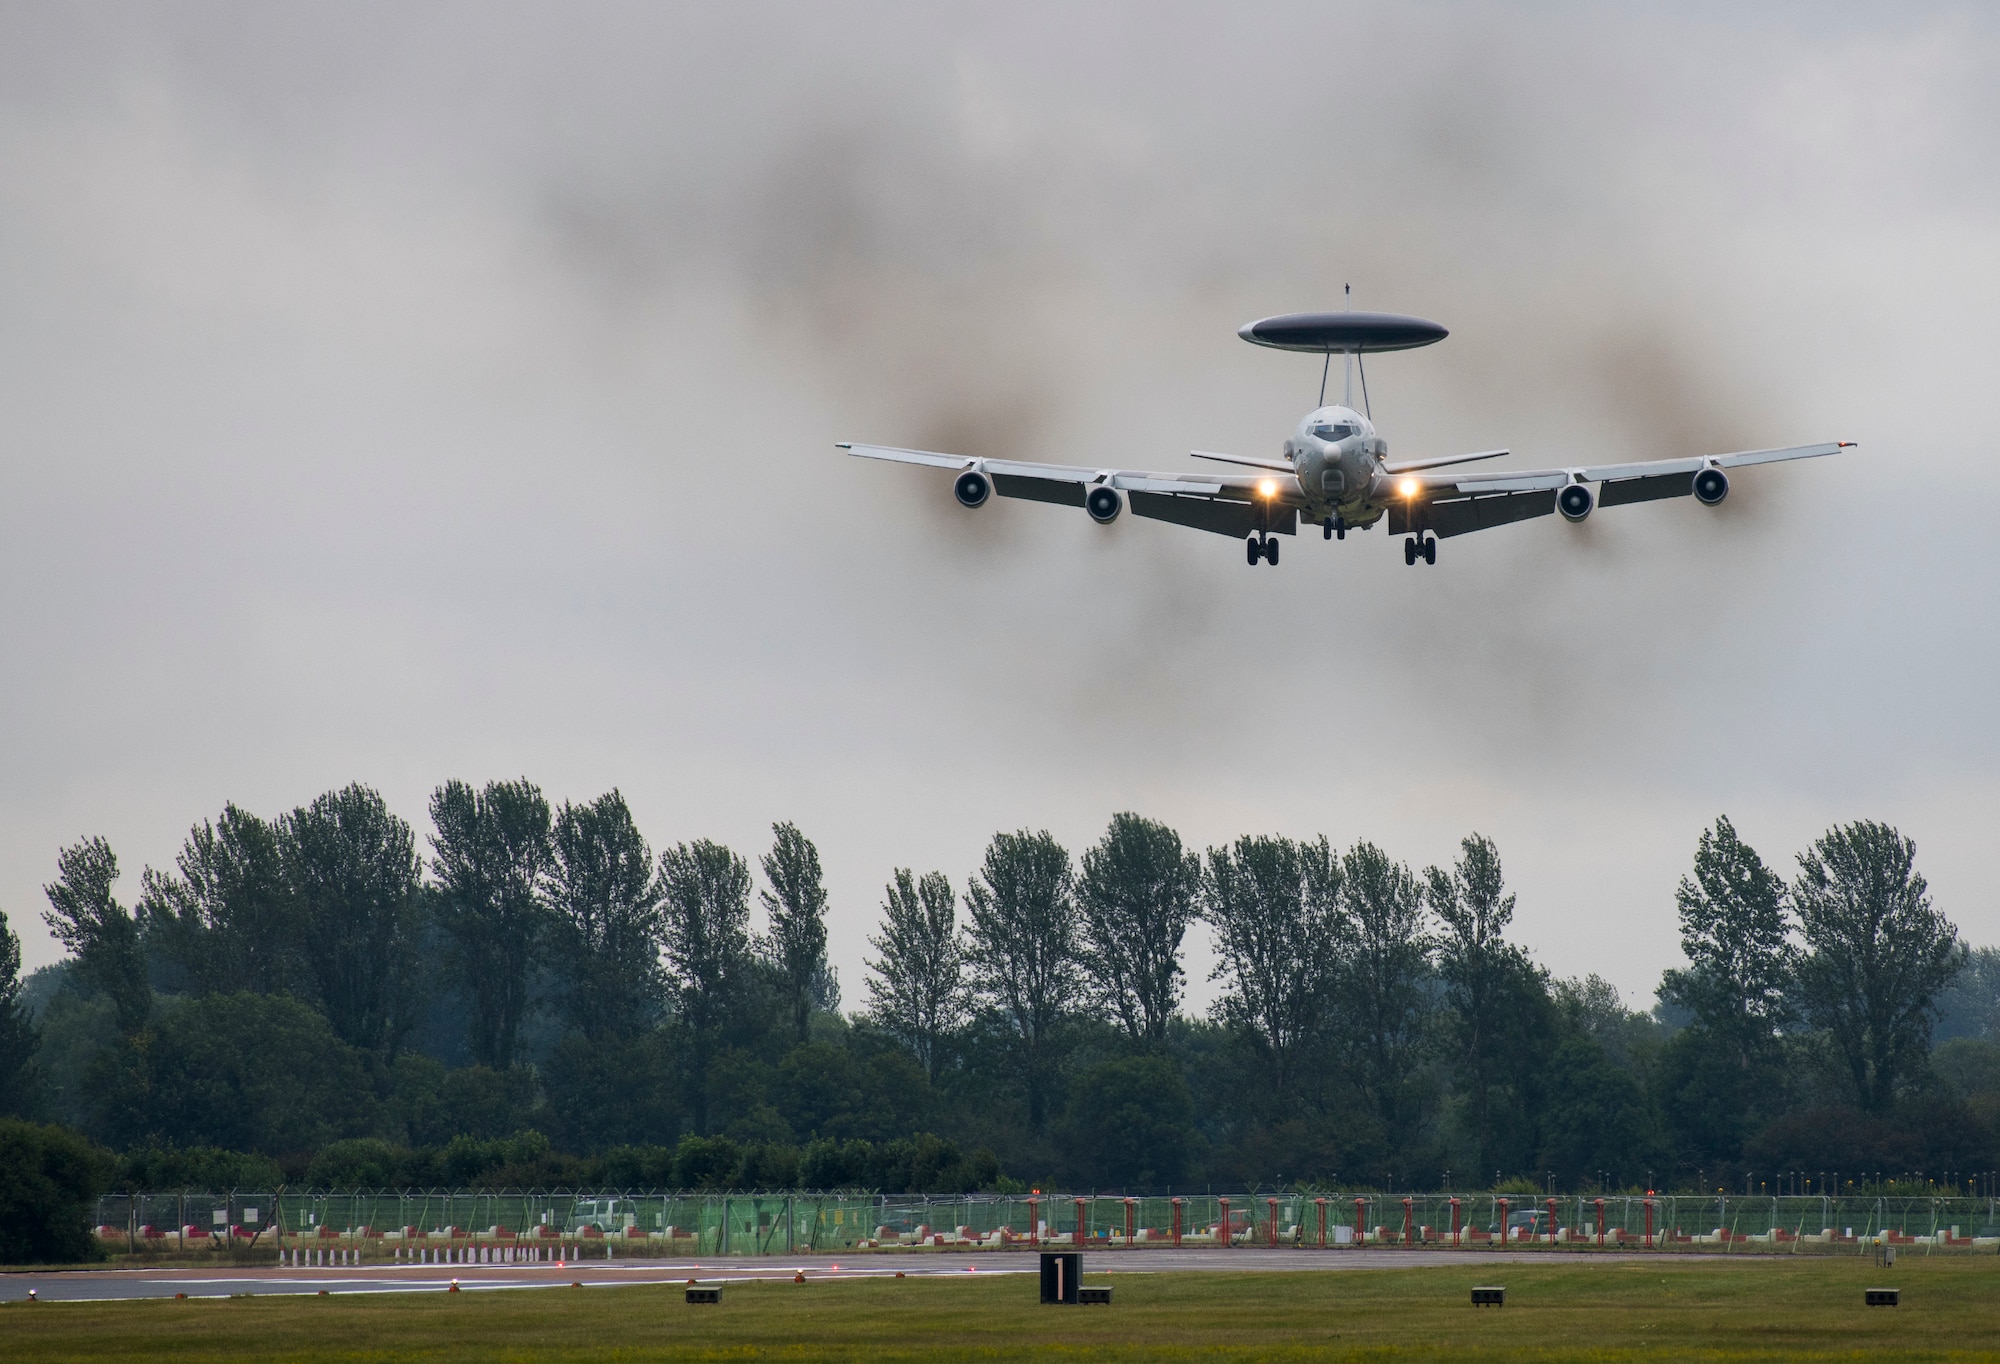 A NATO Airborne Early Warning and Control Force Boeing E-3A Sentry from Geilenkirchen, Germany, approaches for a landing during the 2019 Royal International Air Tattoo at RAF Fairford, England, July 19, 2019. This year, RIAT commemorated the 70th anniversary of NATO and highlighted the United States' enduring commitment to its European allies. (U.S. Air Force photo by Airman 1st Class Jennifer Zima)